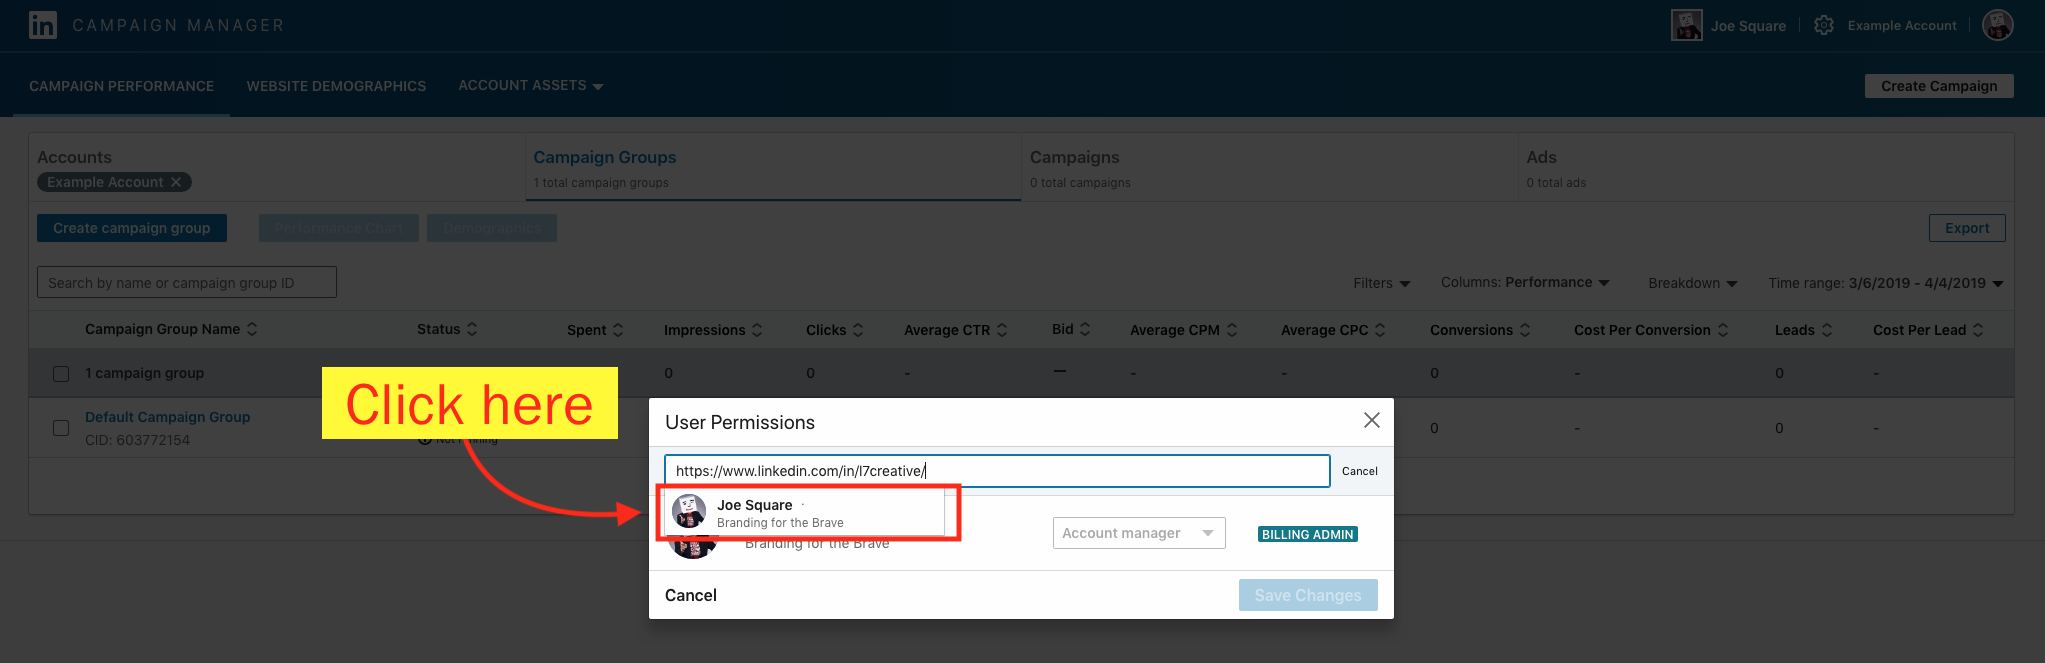 Add a Campaign Manager to Your LinkedIn Ad Account - Step 7 Screenshot